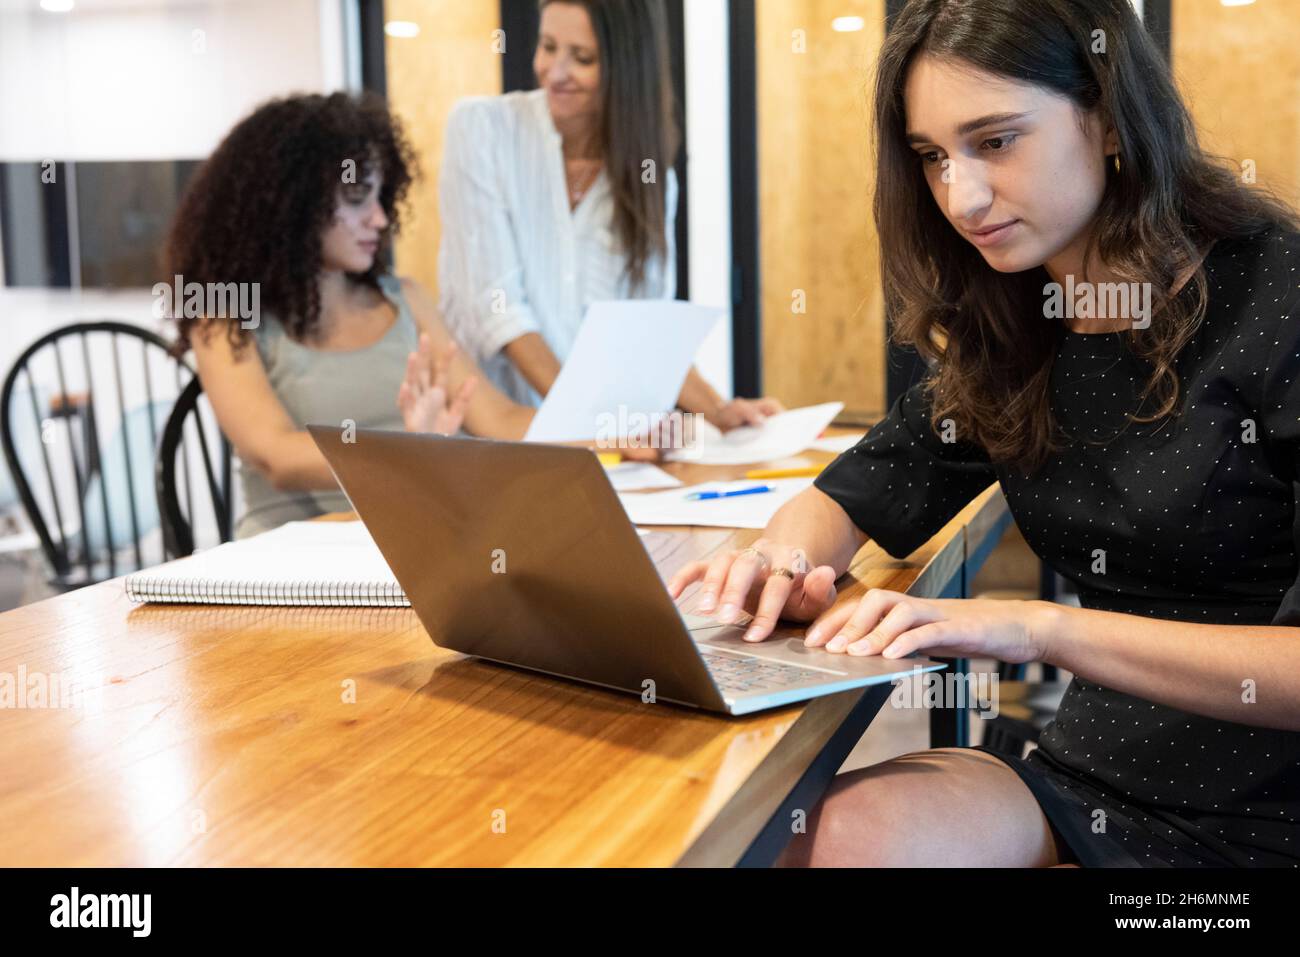 Young woman working on laptop with businesswomen discussing in background Stock Photo